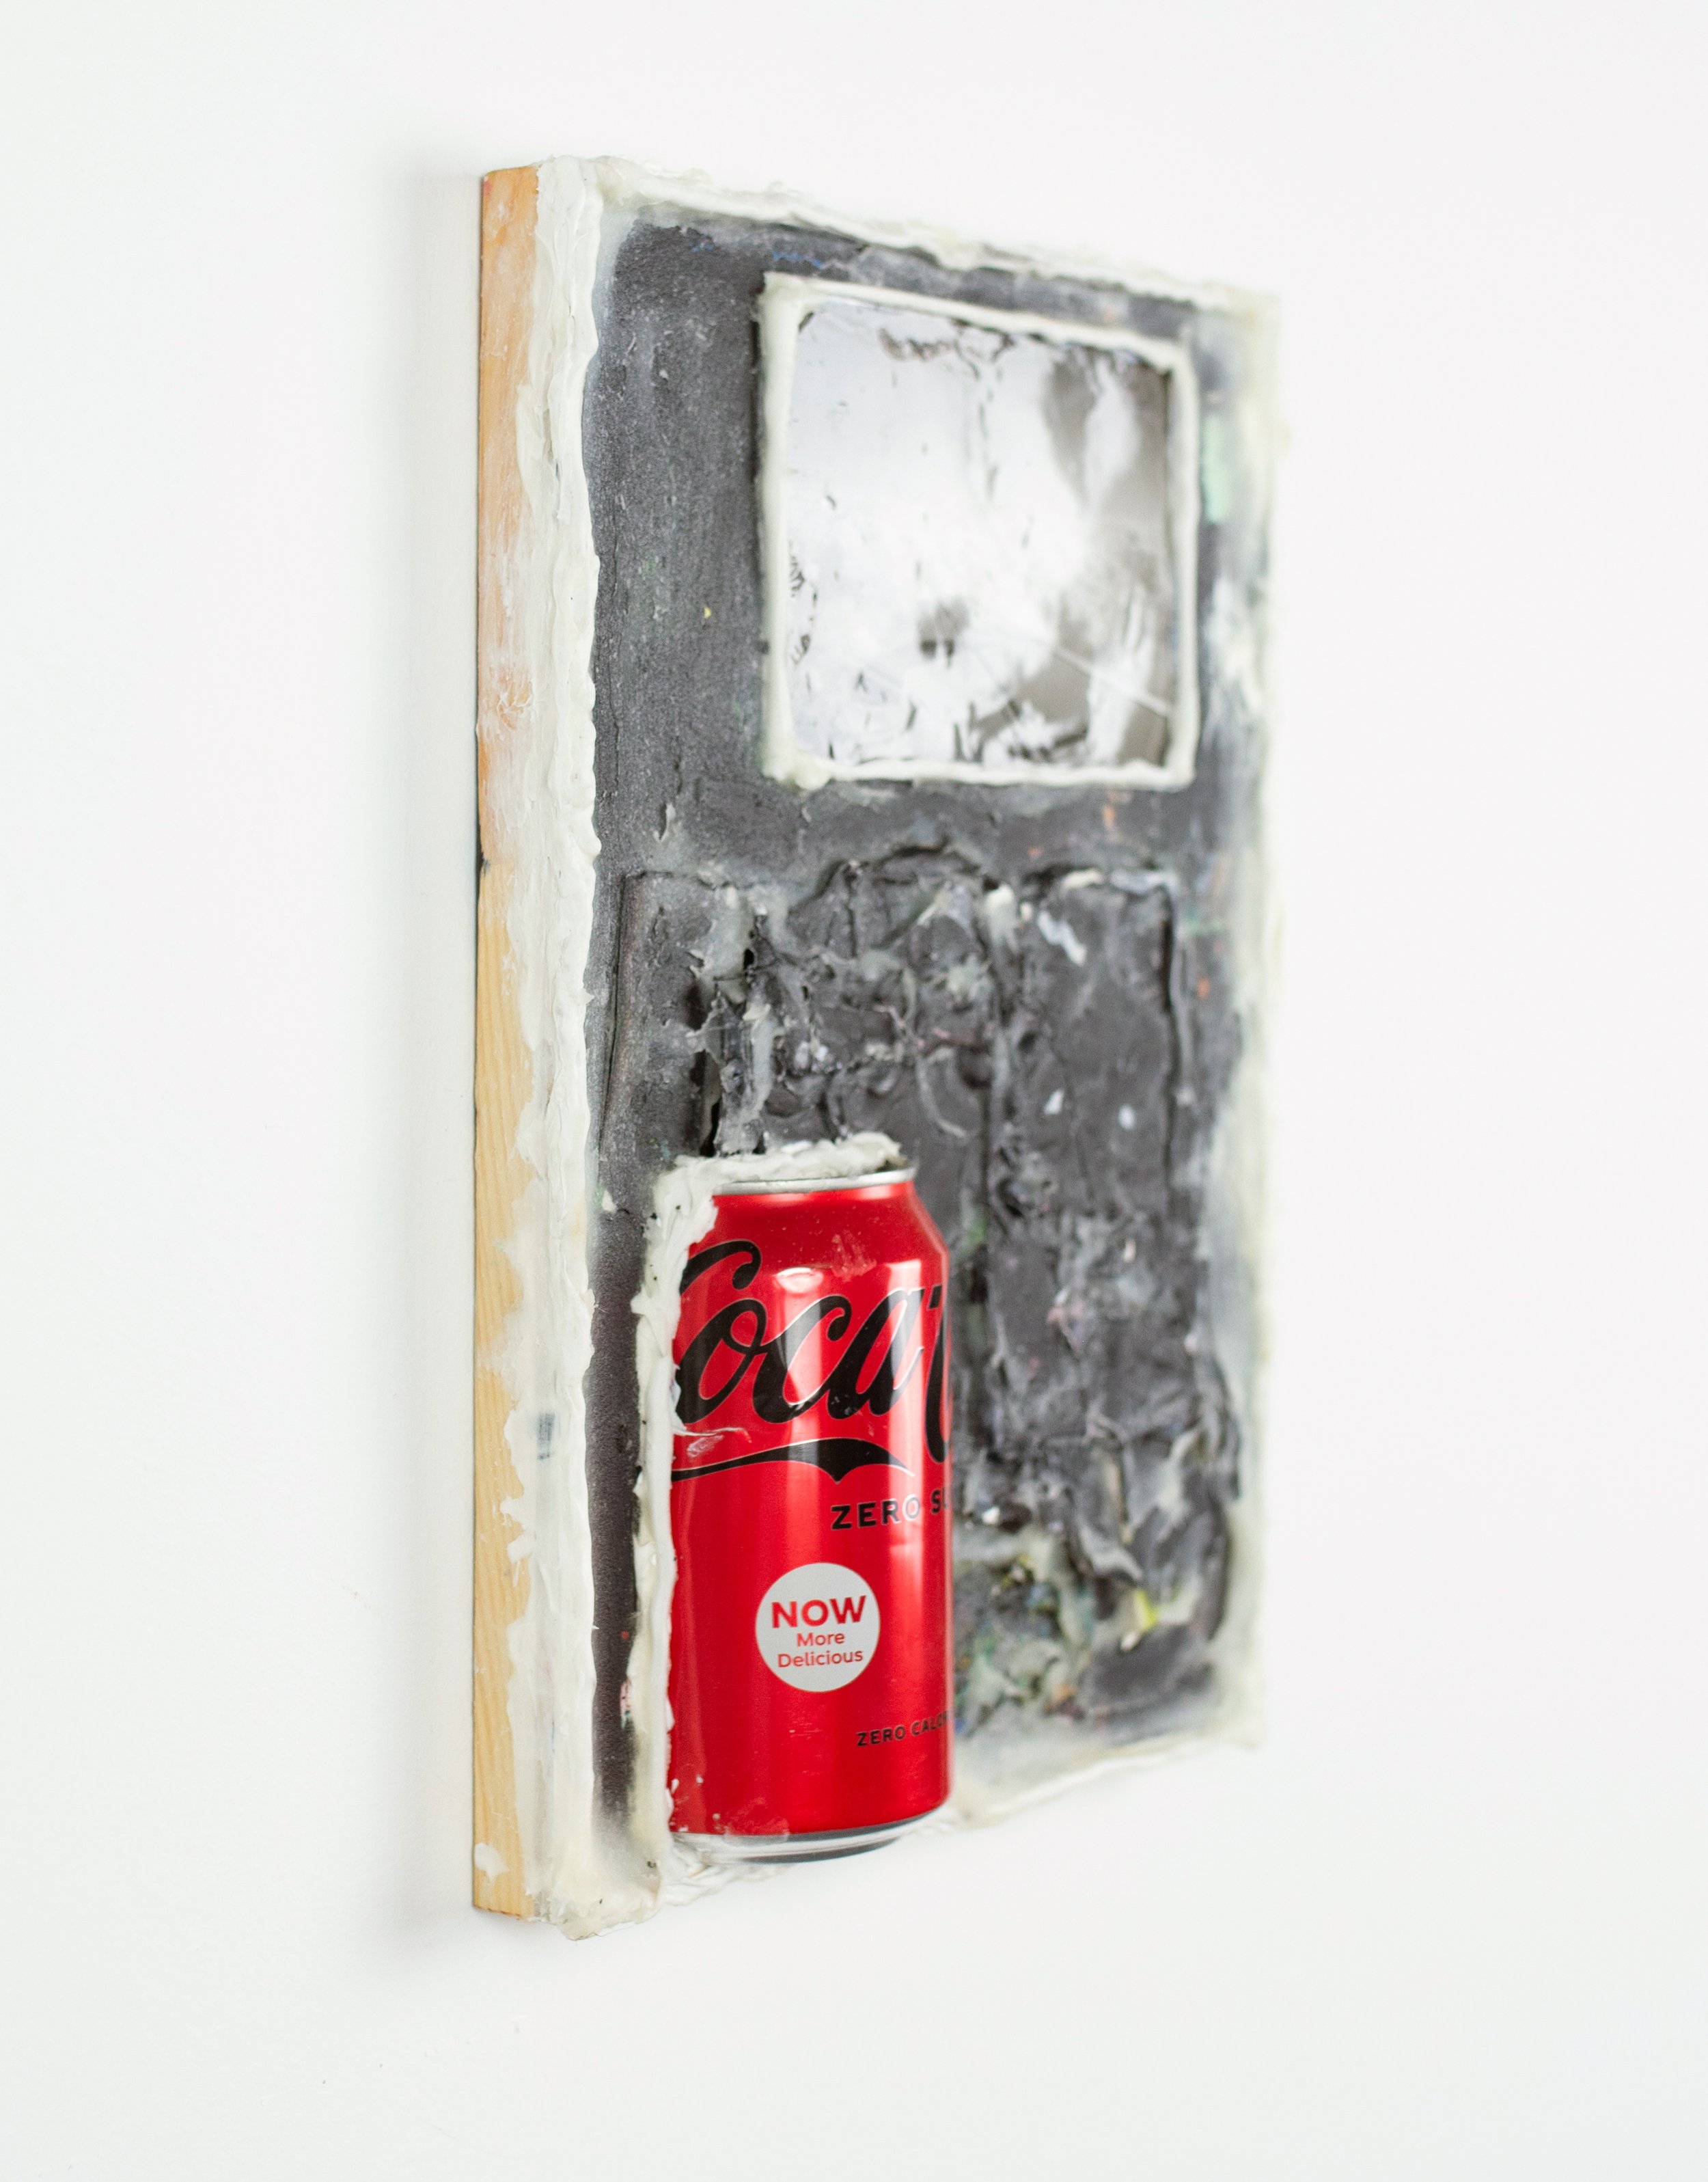  Somewhere Over The Amazon  Oil, acrylic, Sumi ink, family photograph, caulk, cold wax, Coke Zero can mounted on panel    12 x 9 in.  